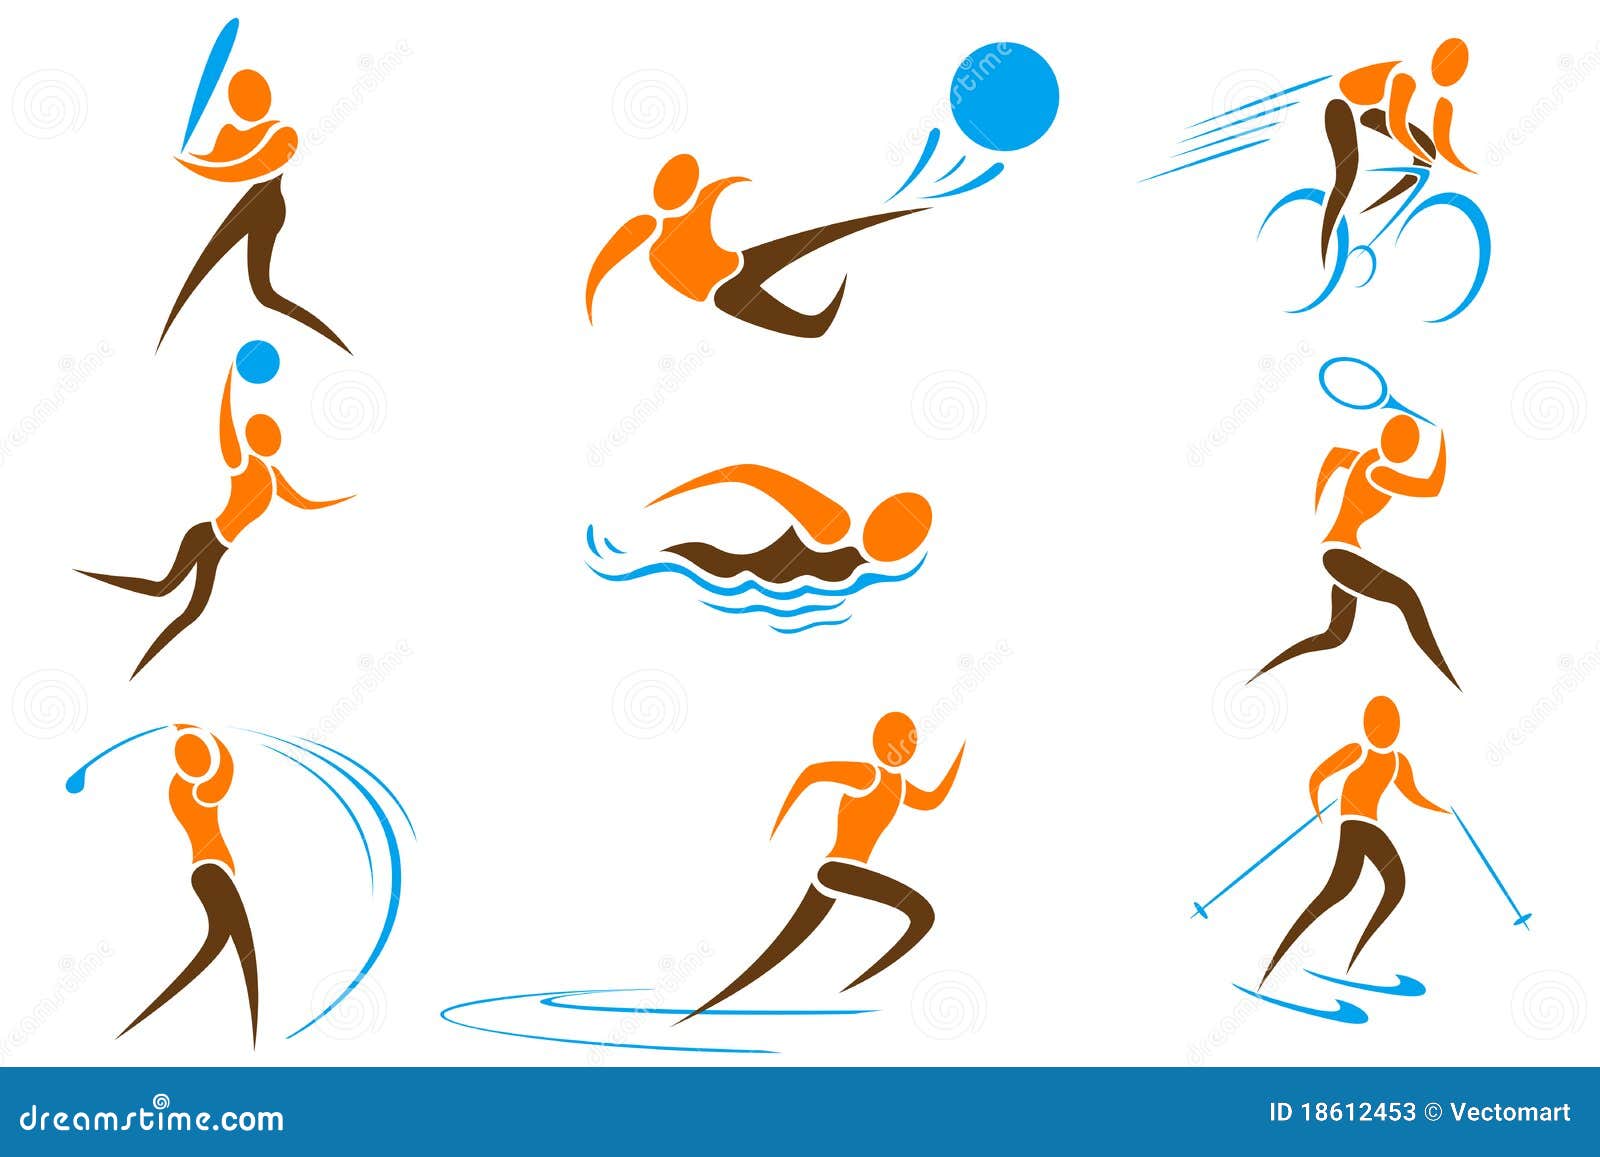 sports clipart vector free - photo #28